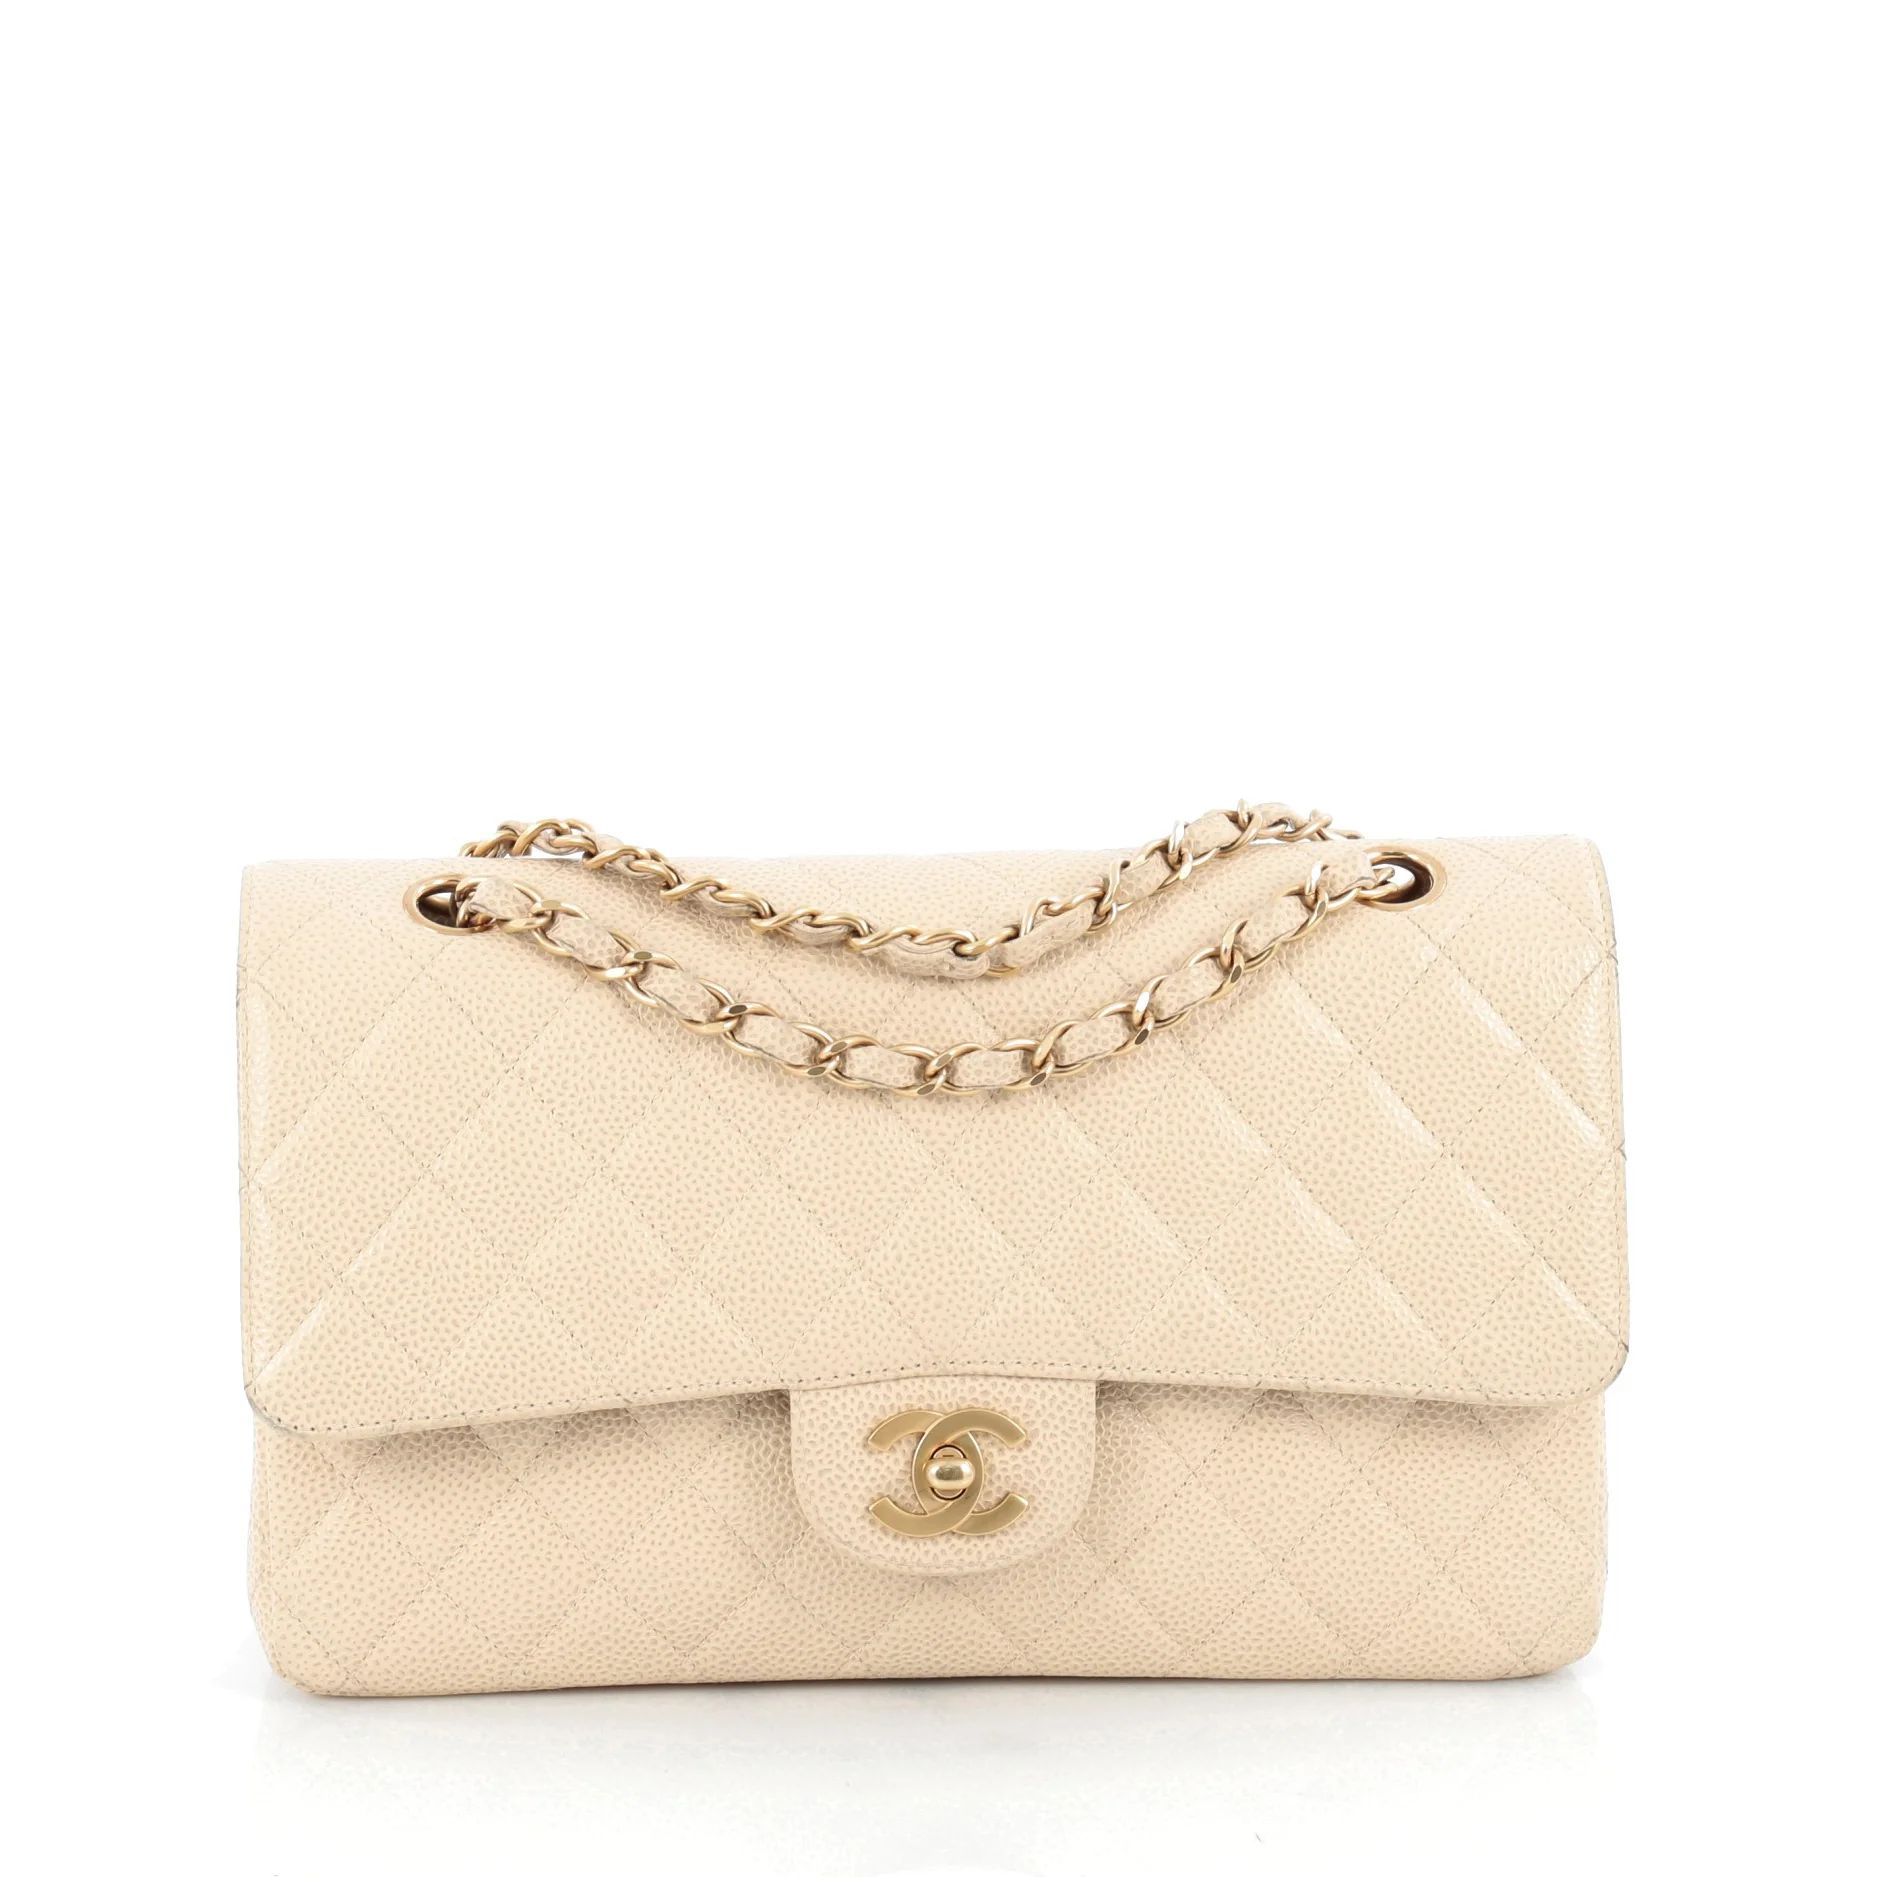 Chanel Vintage Classic Double Flap Bag Quilted Caviar Medium | Rebag